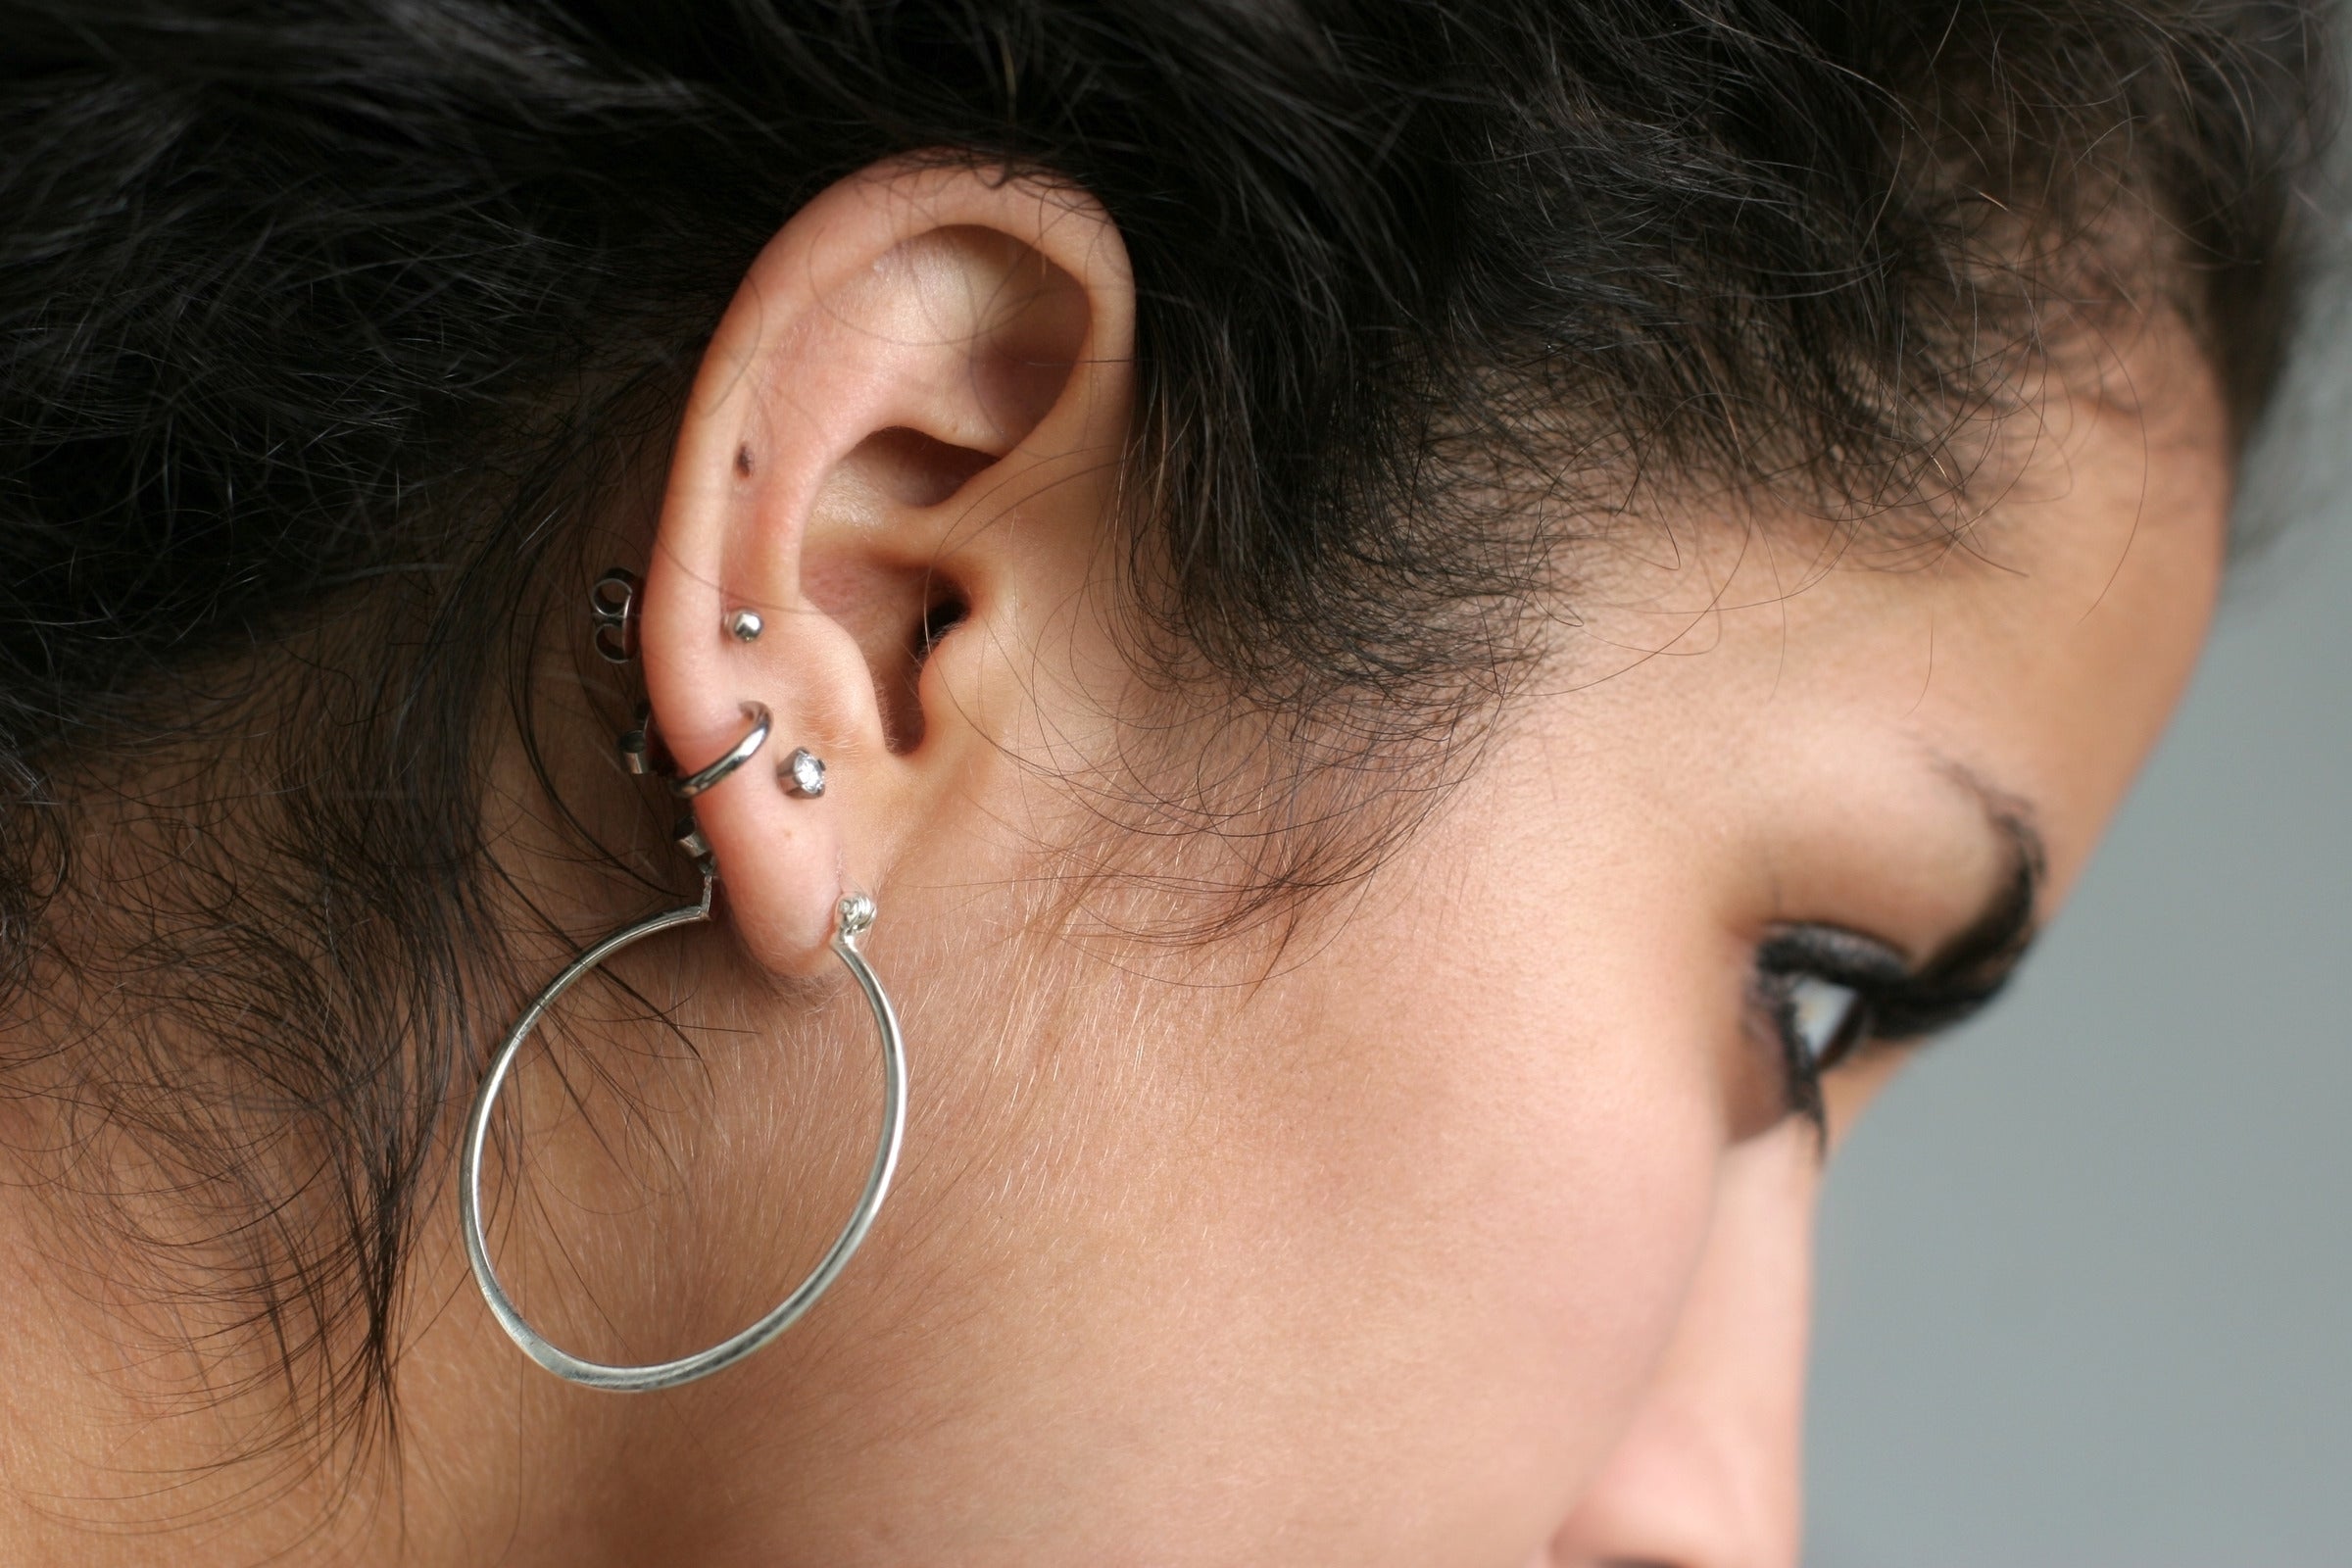 The most painful ear piercings are snug piercings